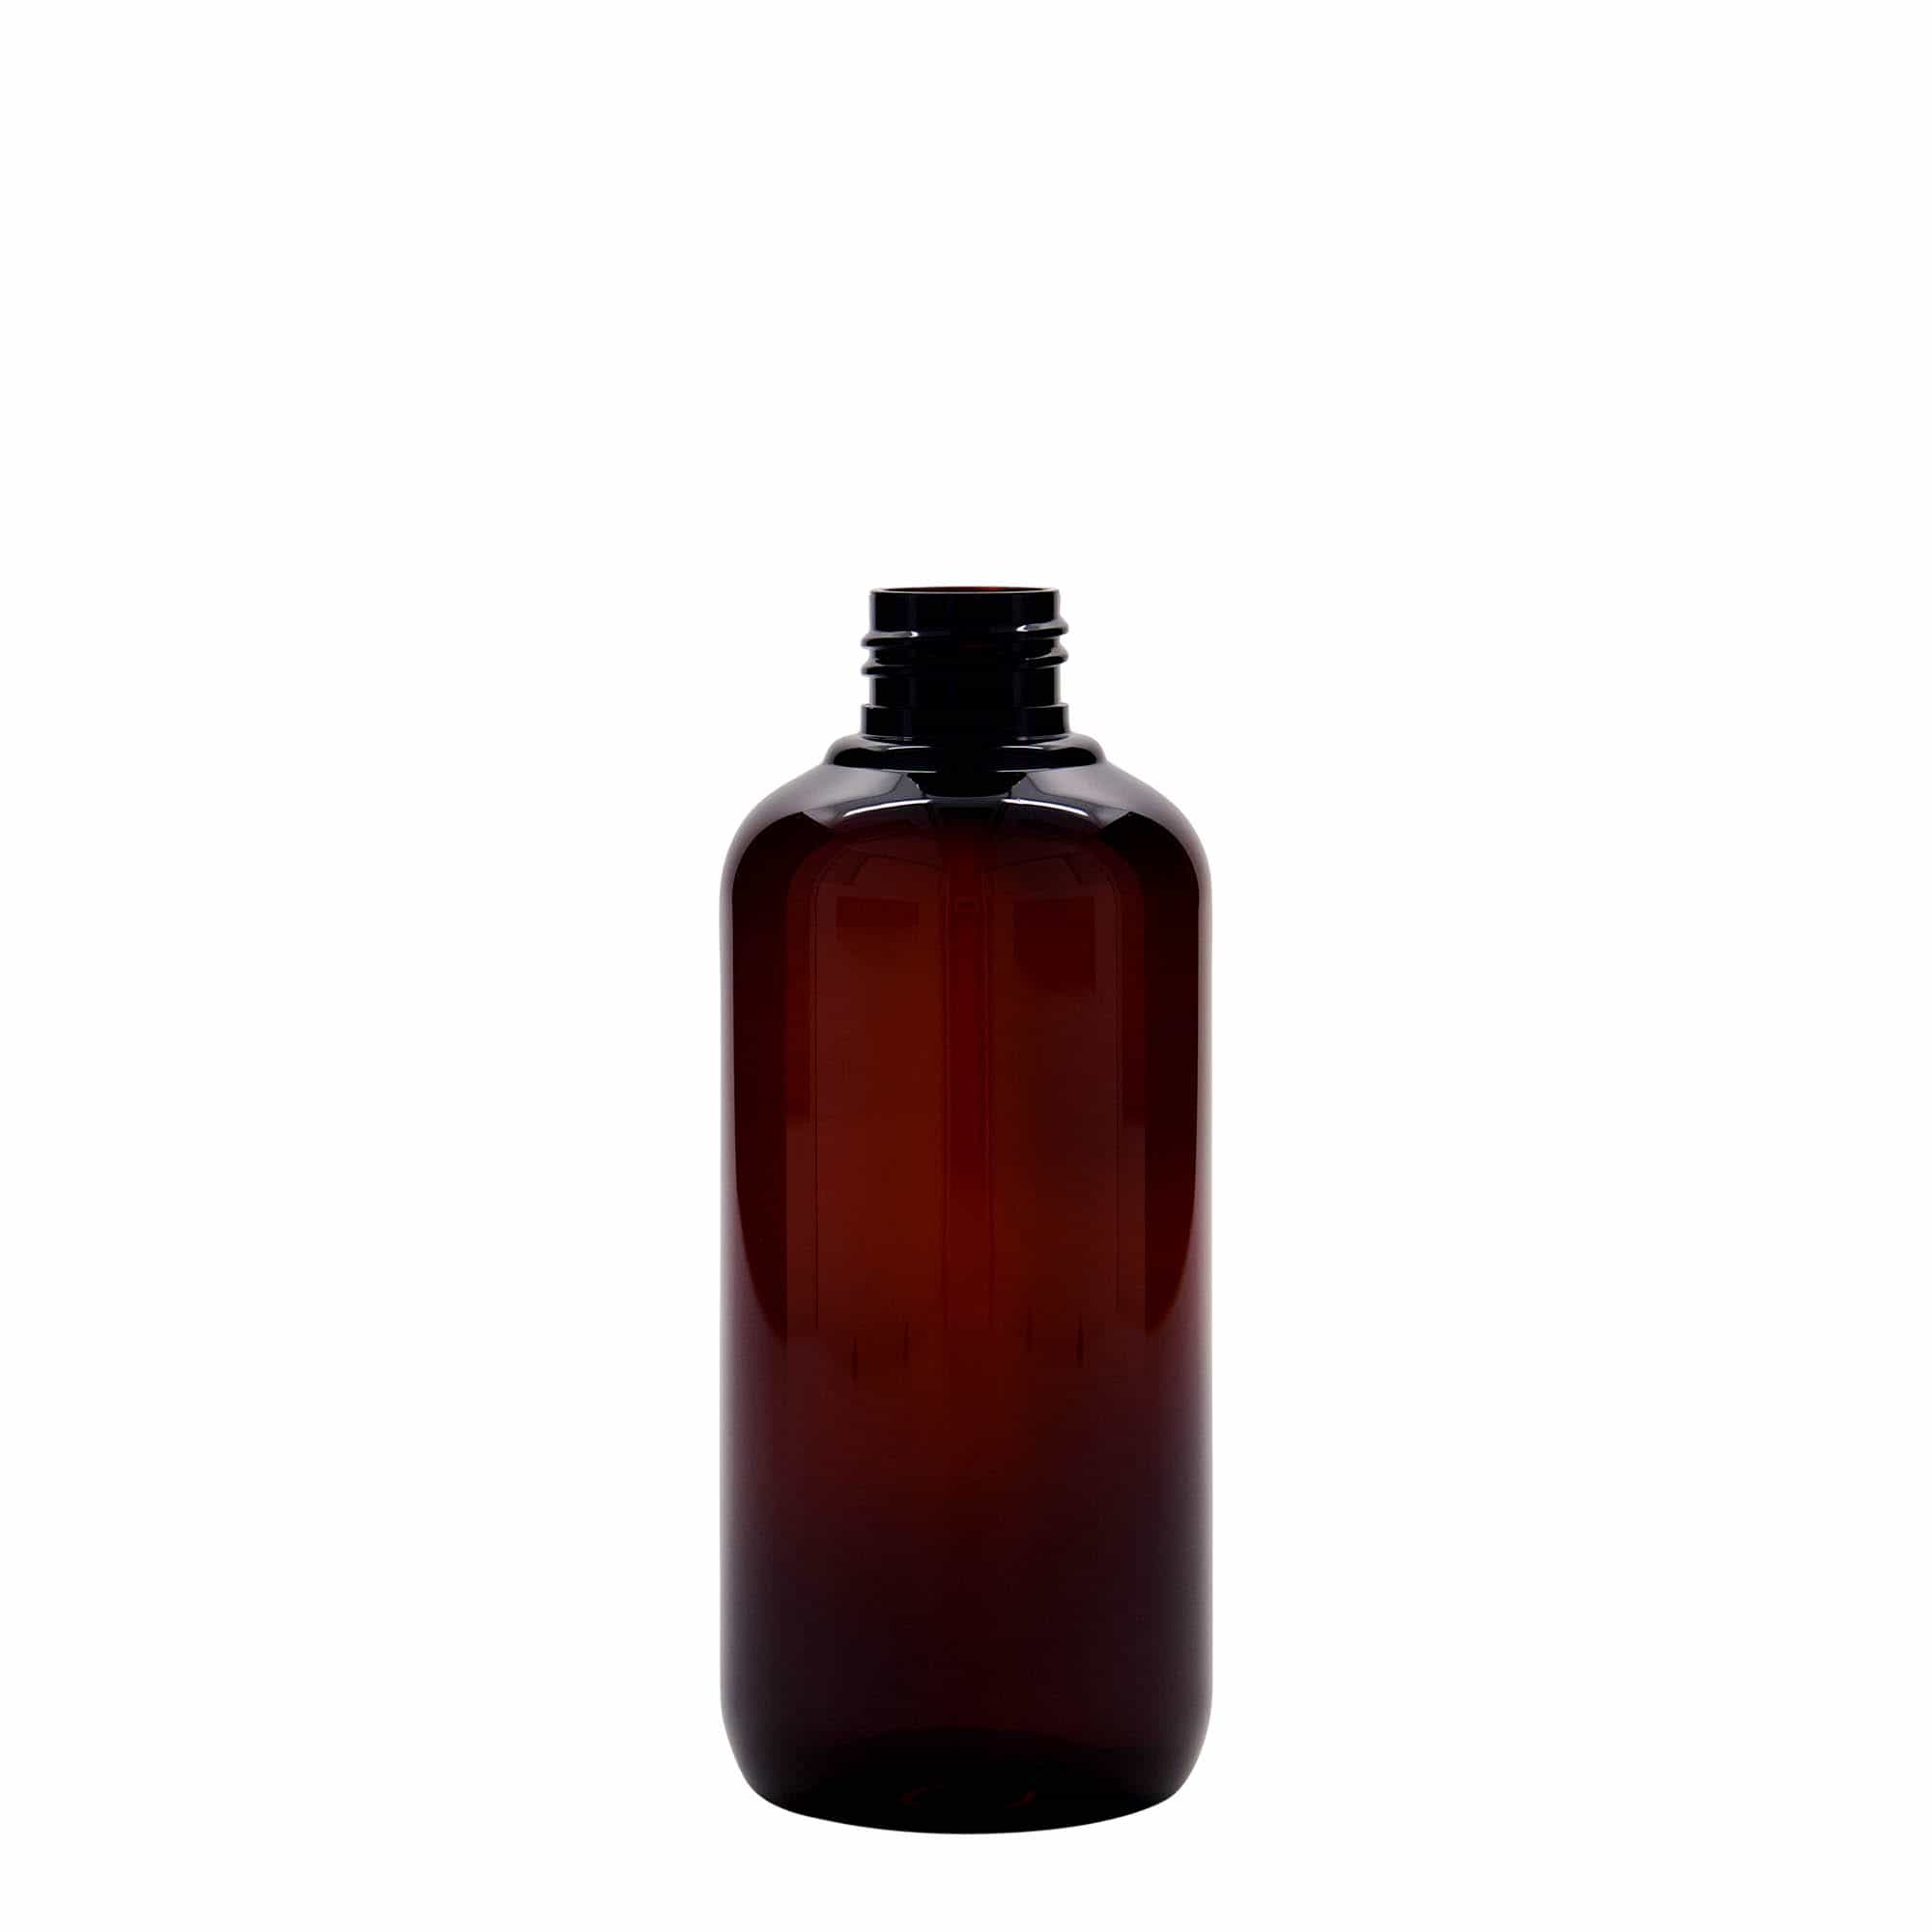 250 ml recycled plastic bottle 'Victor's Best', PCR, brown, closure: GPI 24/410